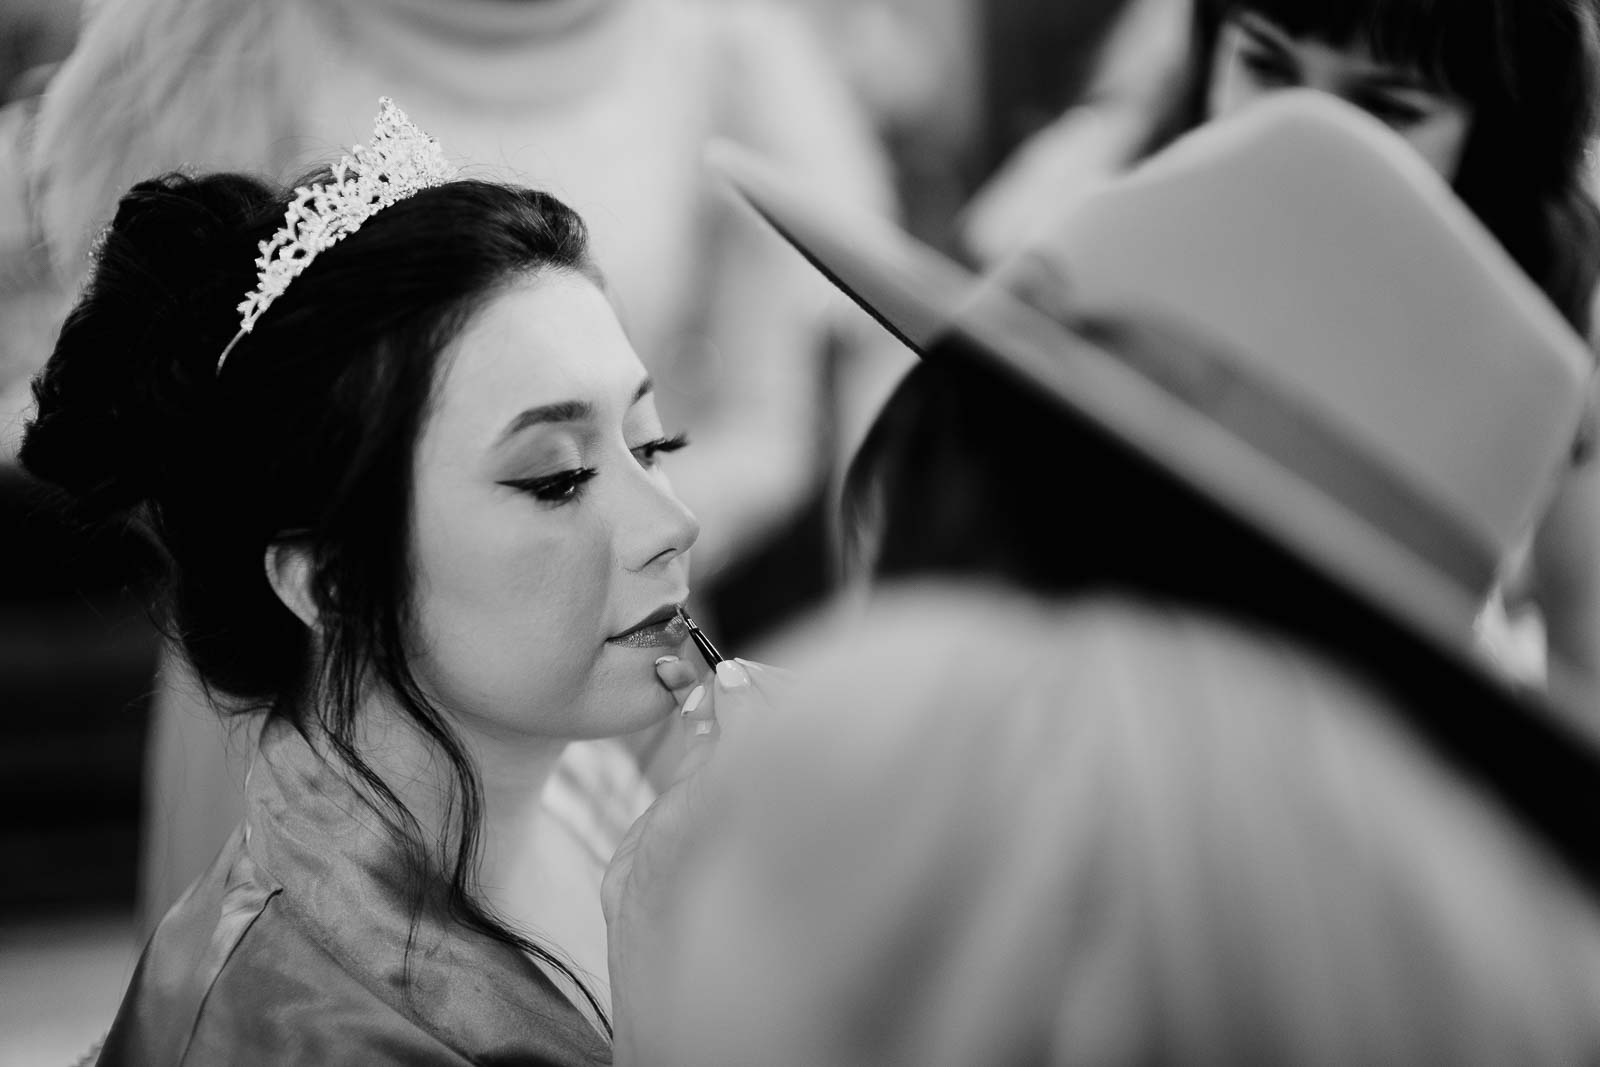 Lipstick is applied to the brides lips